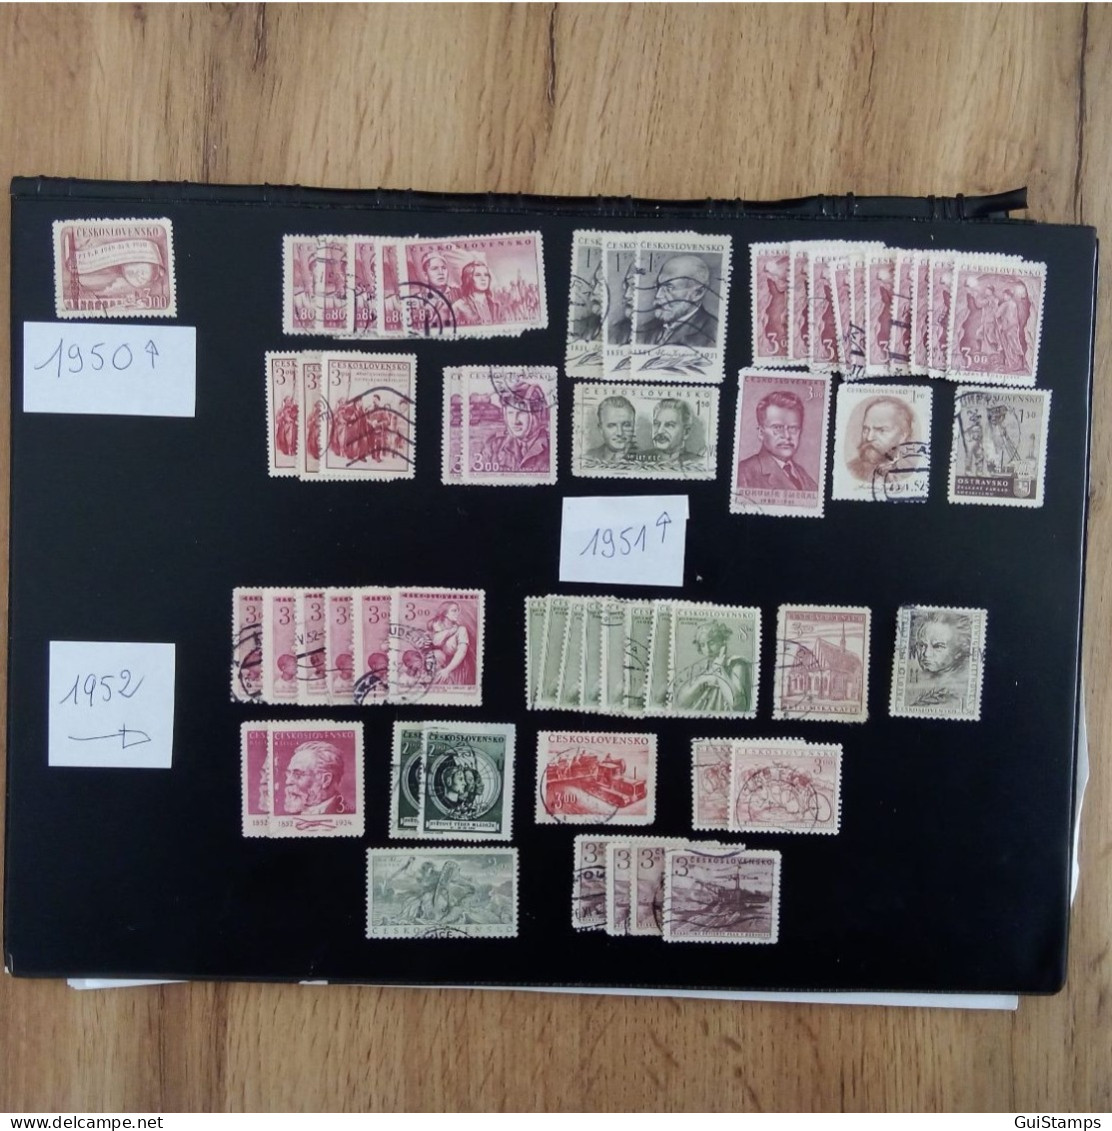 Stamps Czechoslovakia 1950 Do 1959 - Rare Selection Small Price - Gebraucht